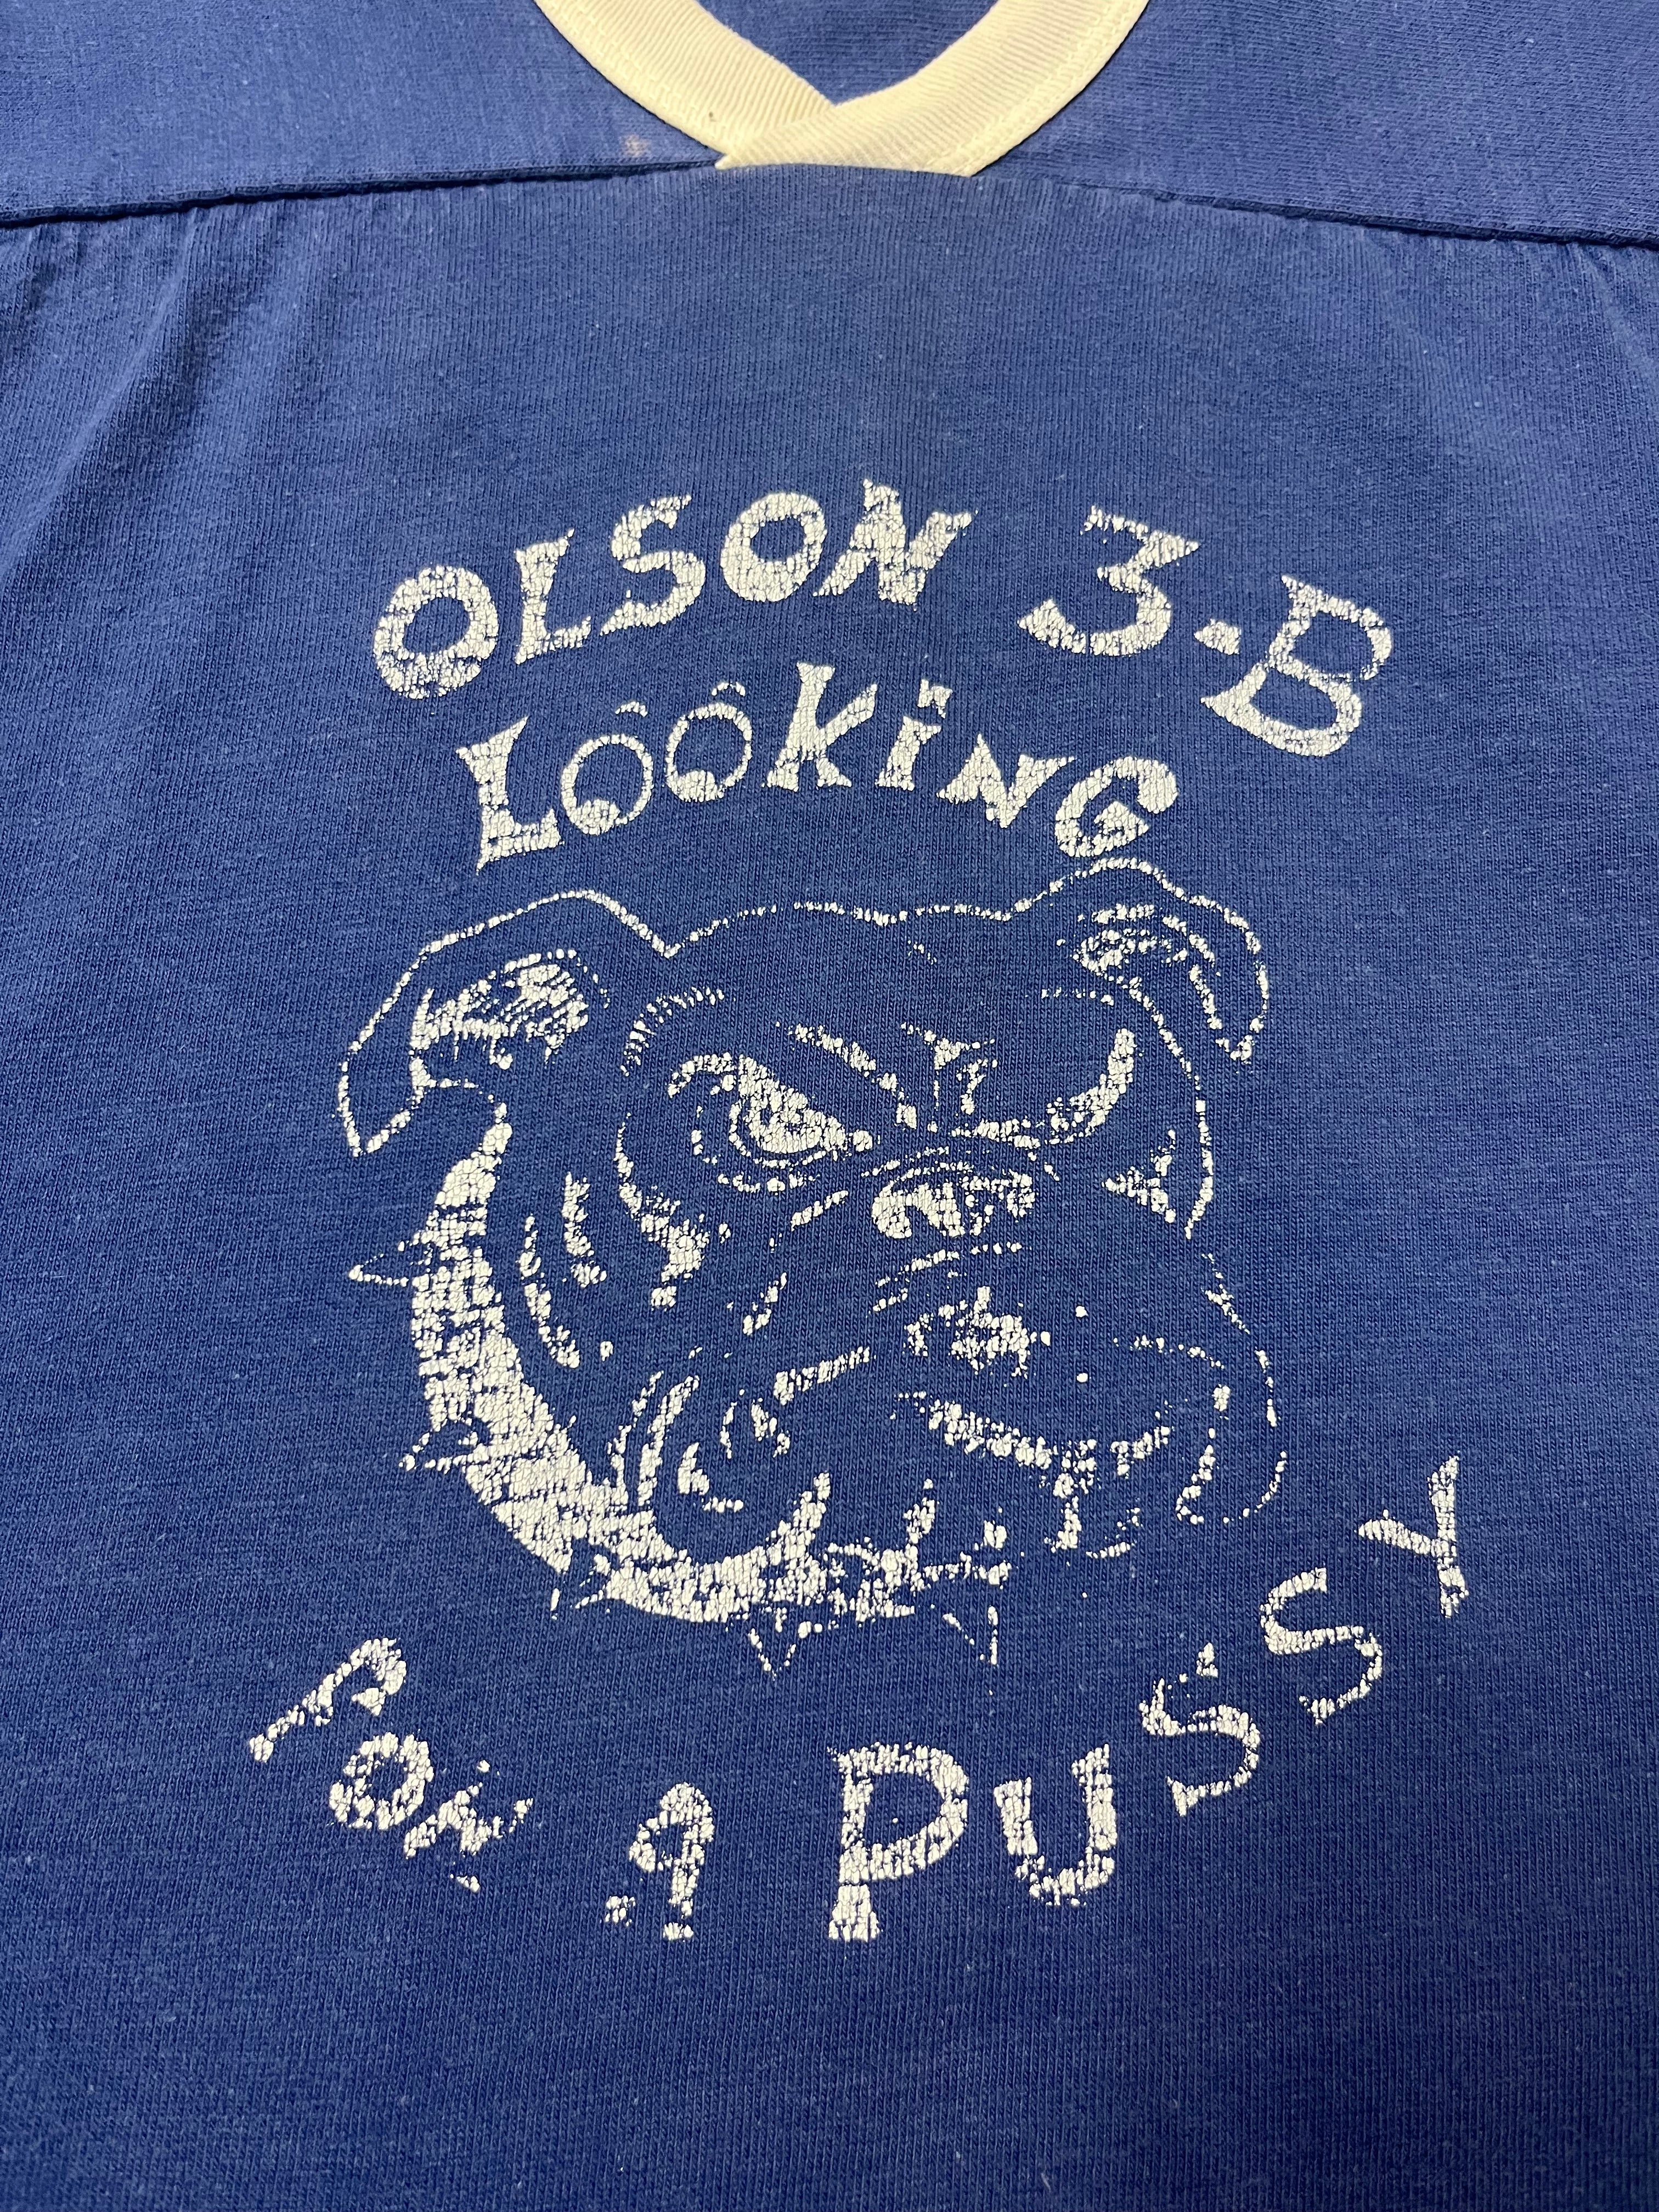 ‘60s/70s ‘Looking for a Pussy’ Cotton Football Shirt - Team Blue - L/XL